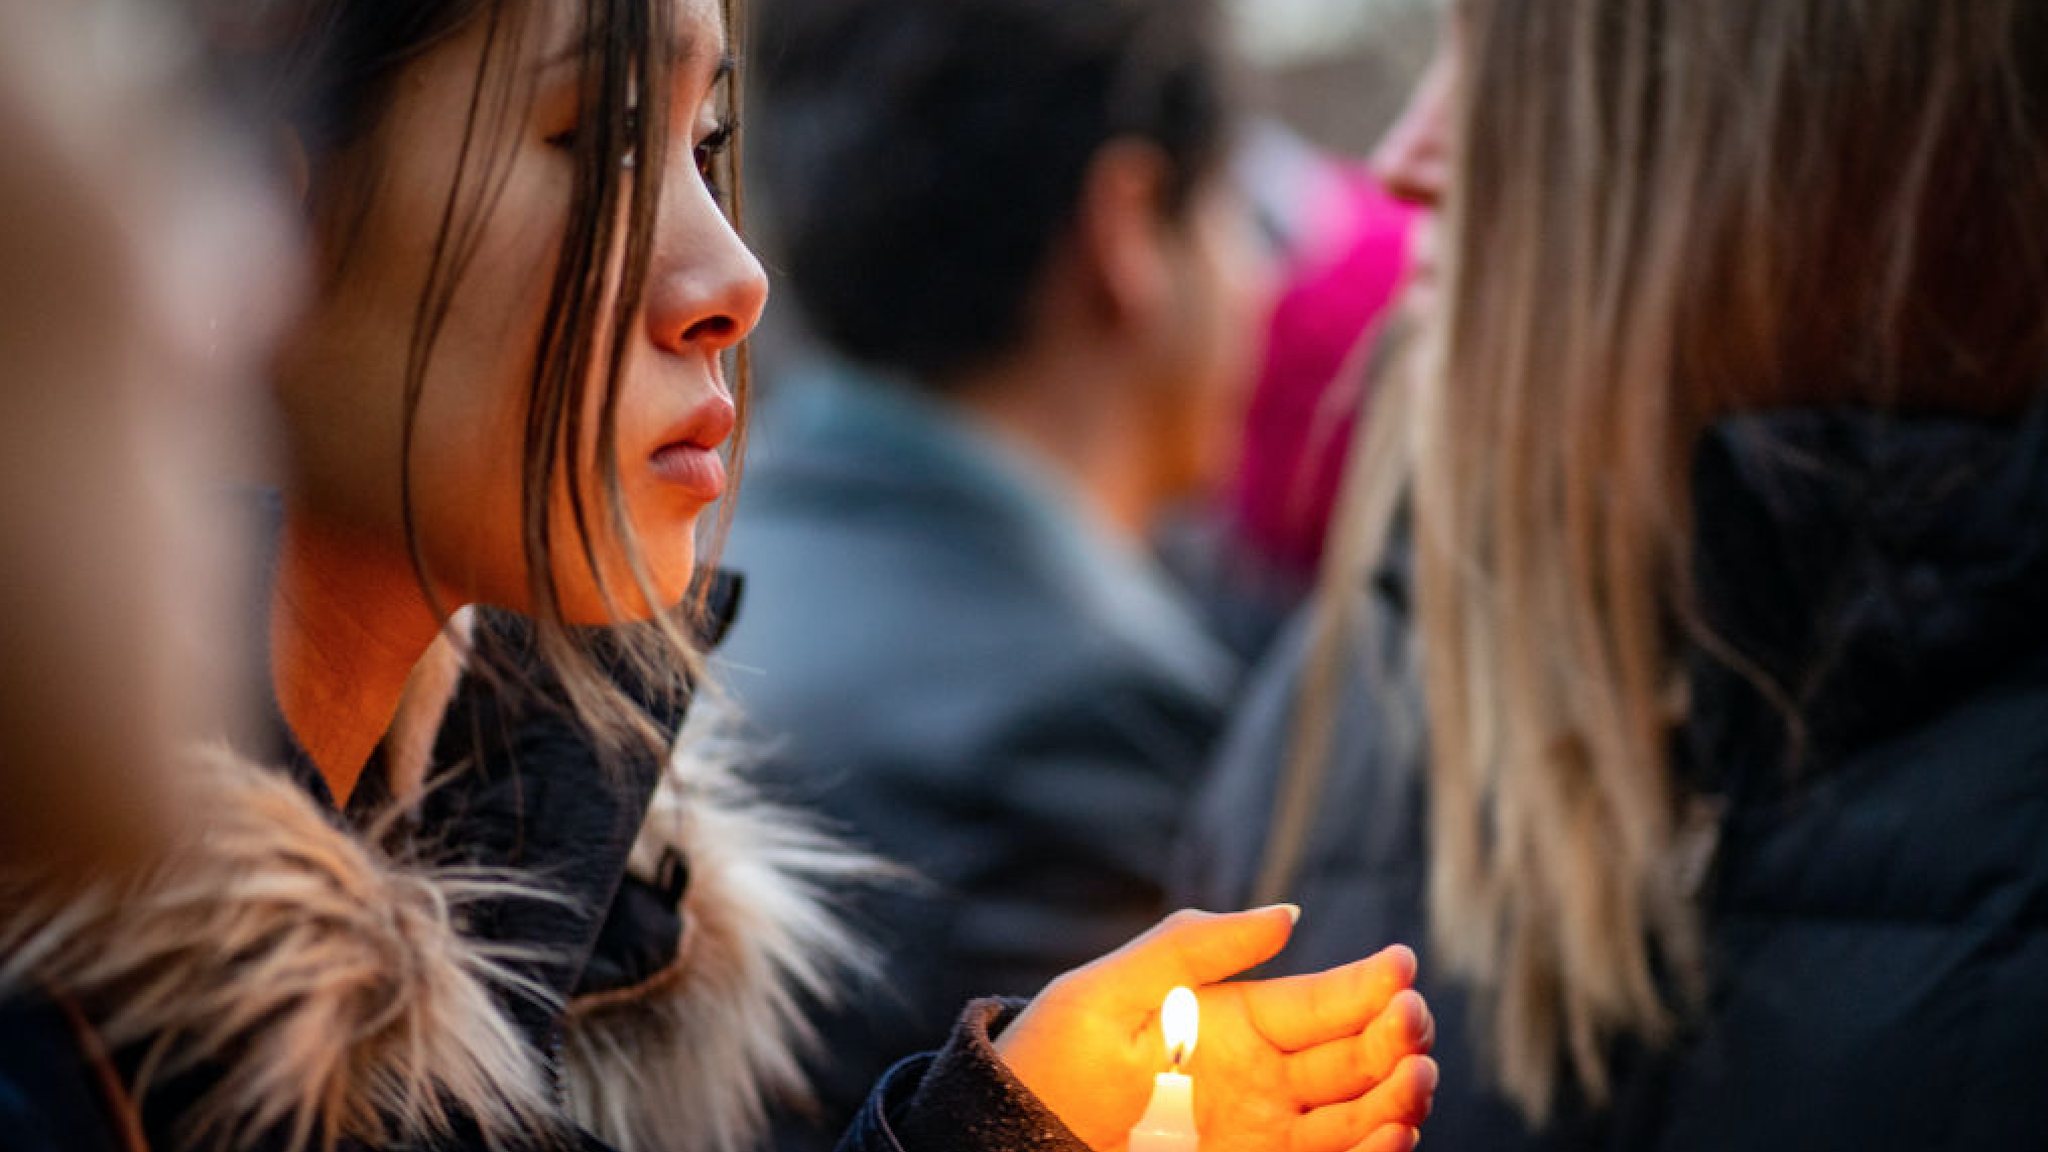 Hundreds attend a candlelight vigil held for a murdered Barnard College student Tessa Majors on December 15, 2019 in New York City. A 13-year-old suspect has been arrested in connection with the death of 18-year-old Barnard College freshman Tessa Rane Majors.